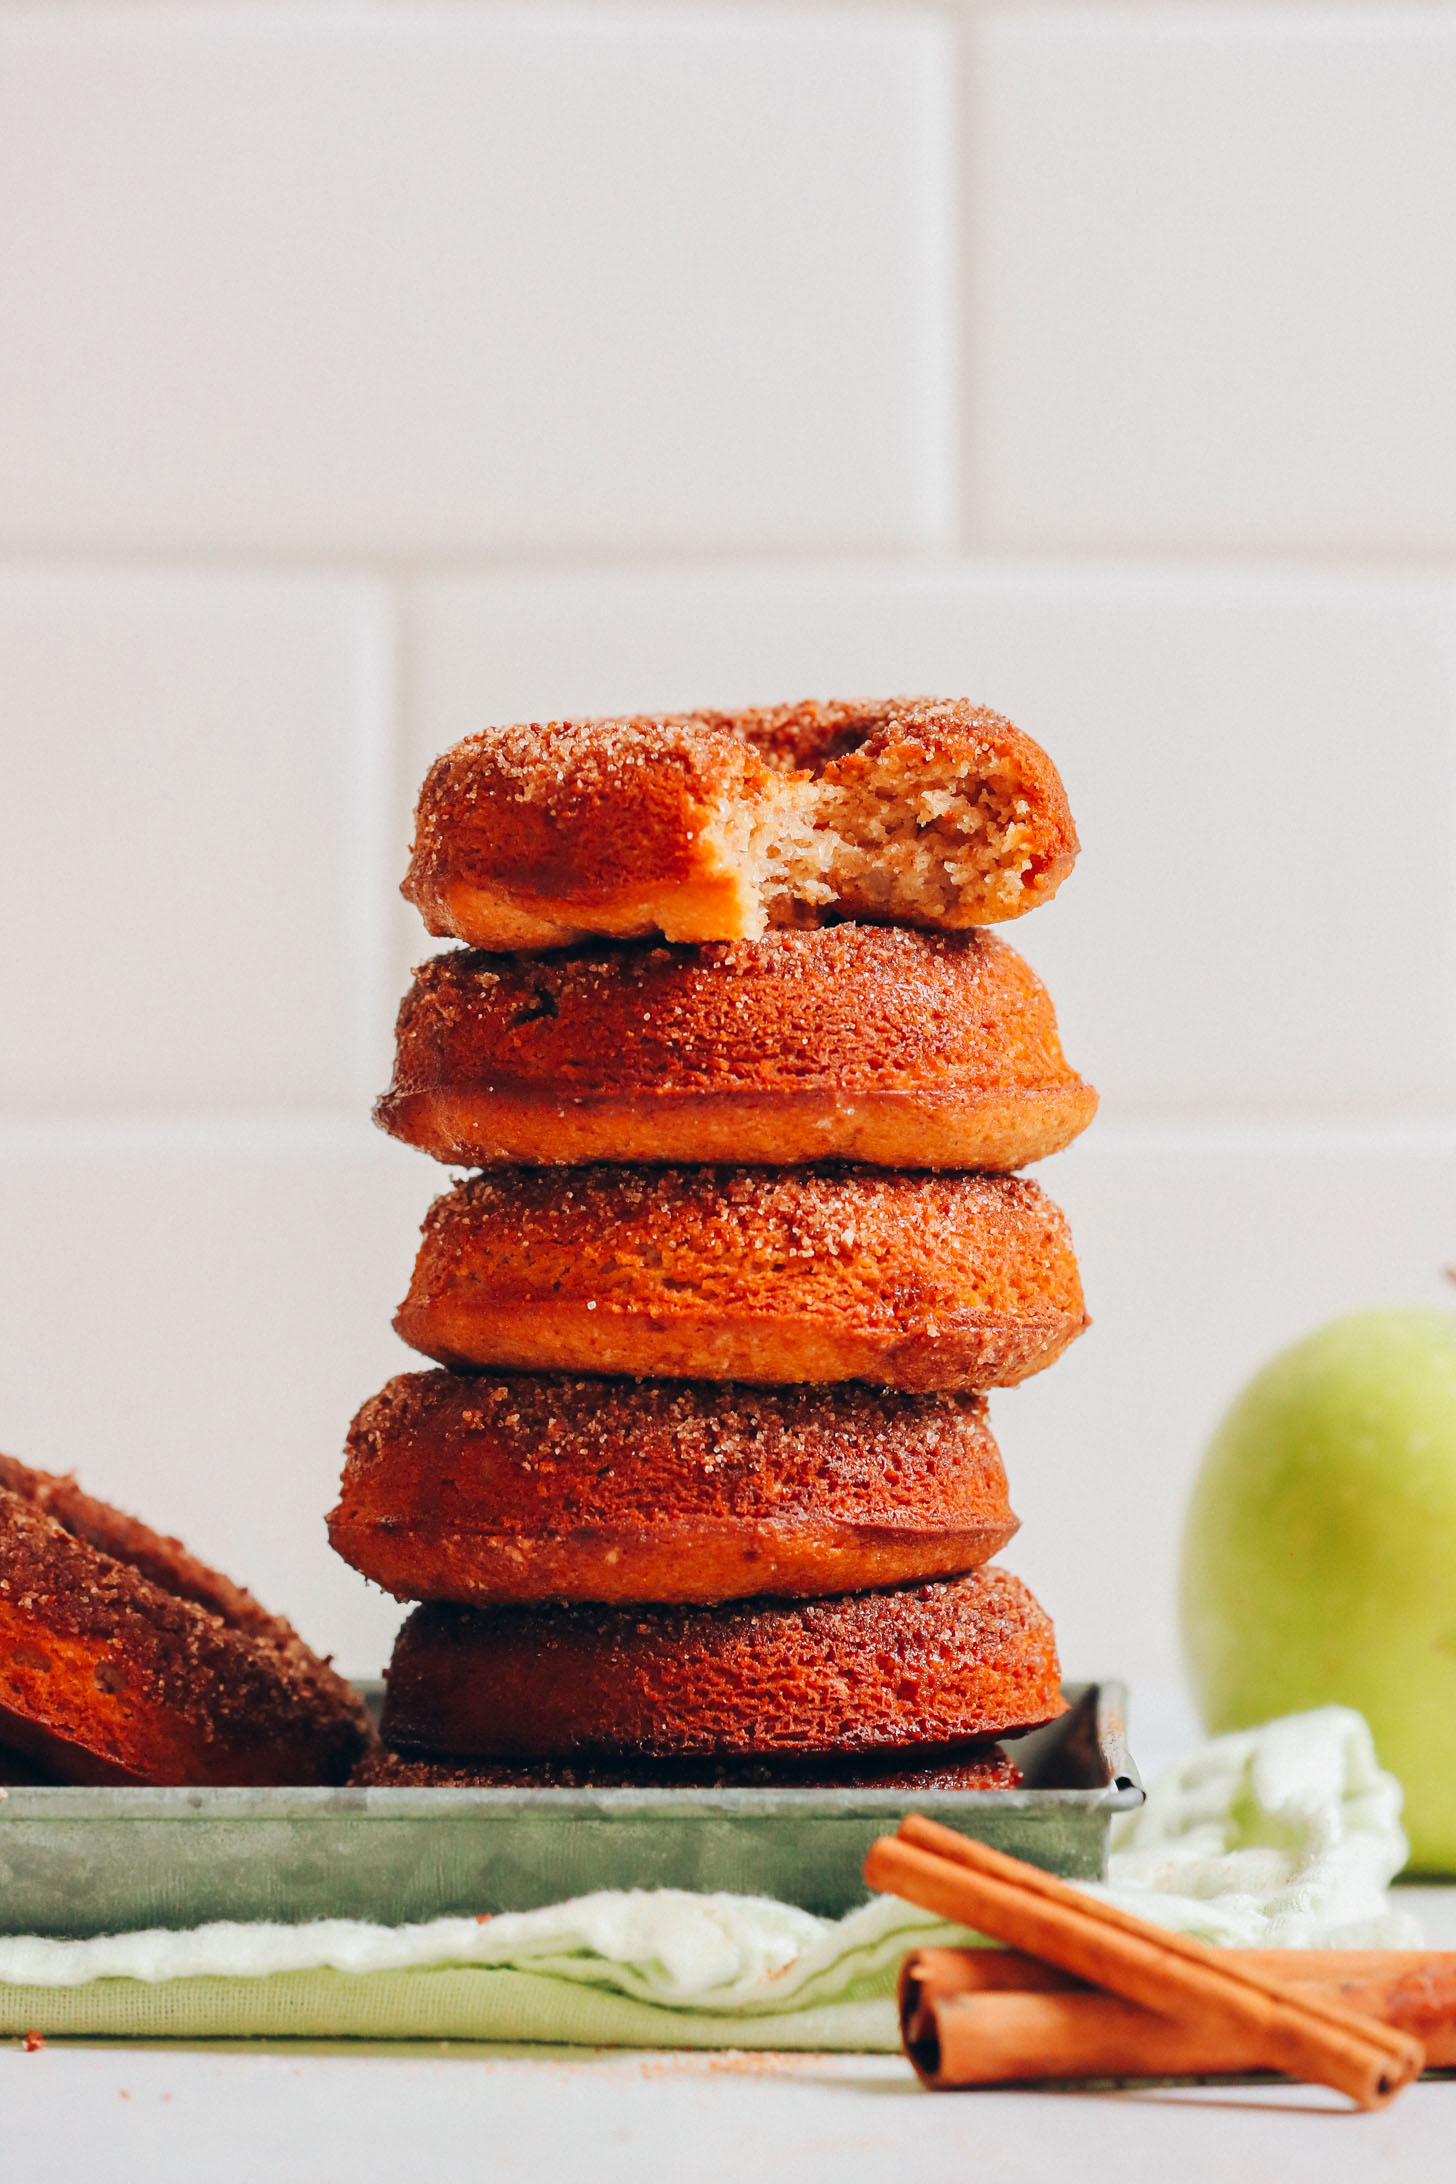 Stack of our delicious Vegan Gluten-Free Apple Cider Donuts topped with cinnamon and sugar